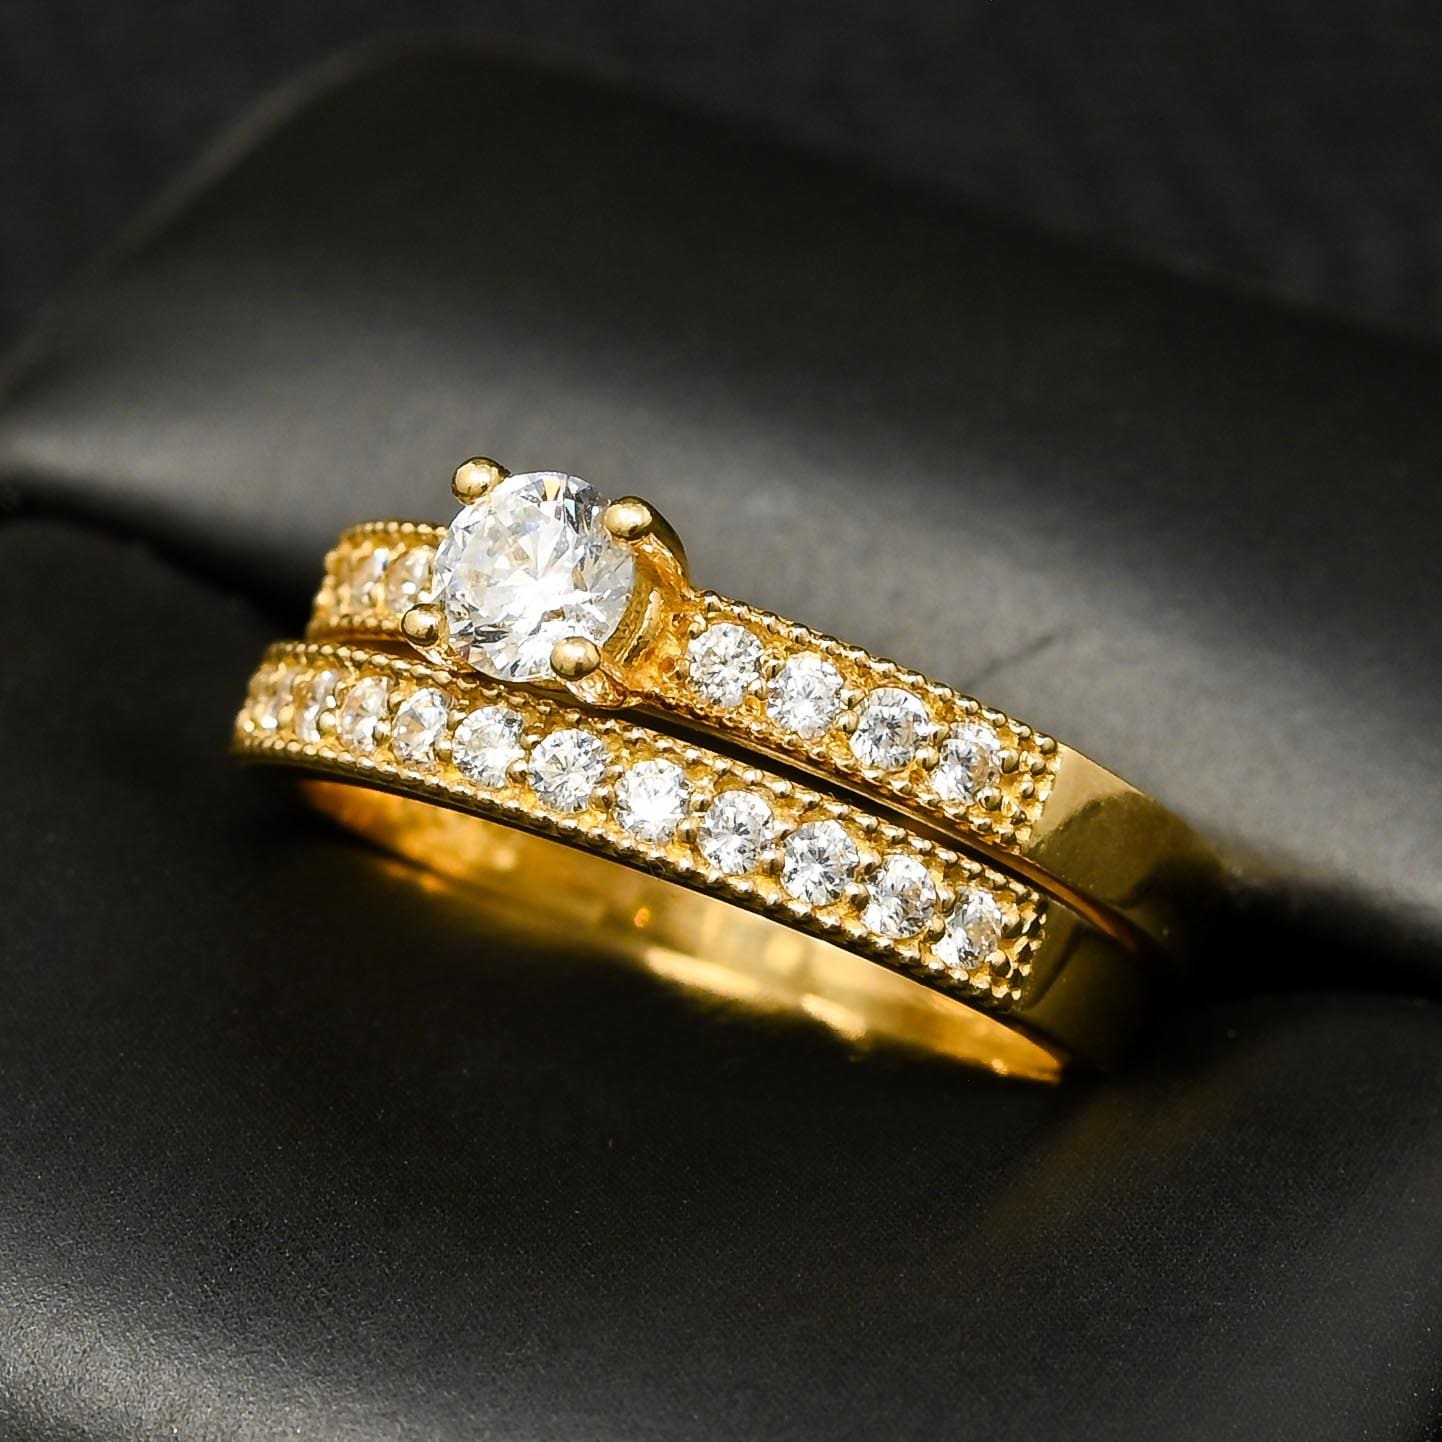 10K Gold Ring | Women's Ring Twins F10 Yellow Gold